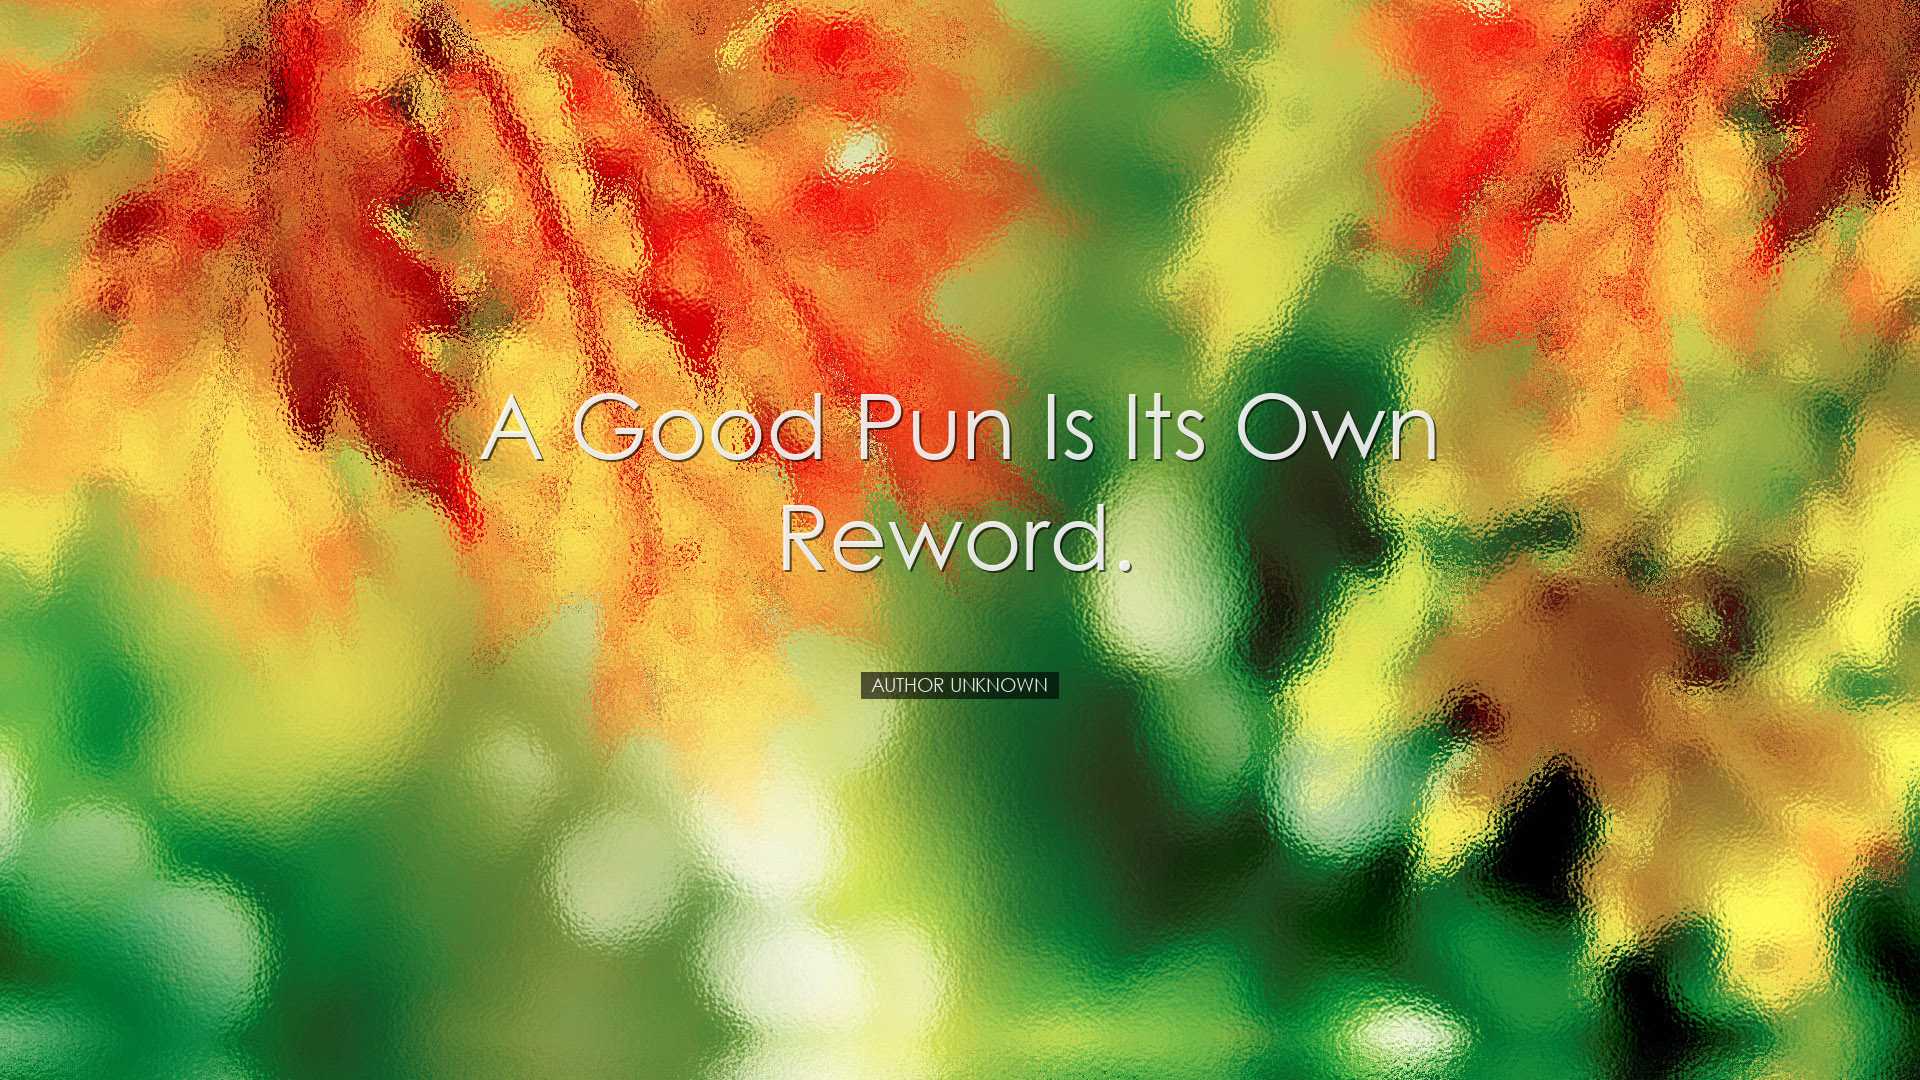 A good pun is its own reword. - Author Unknown